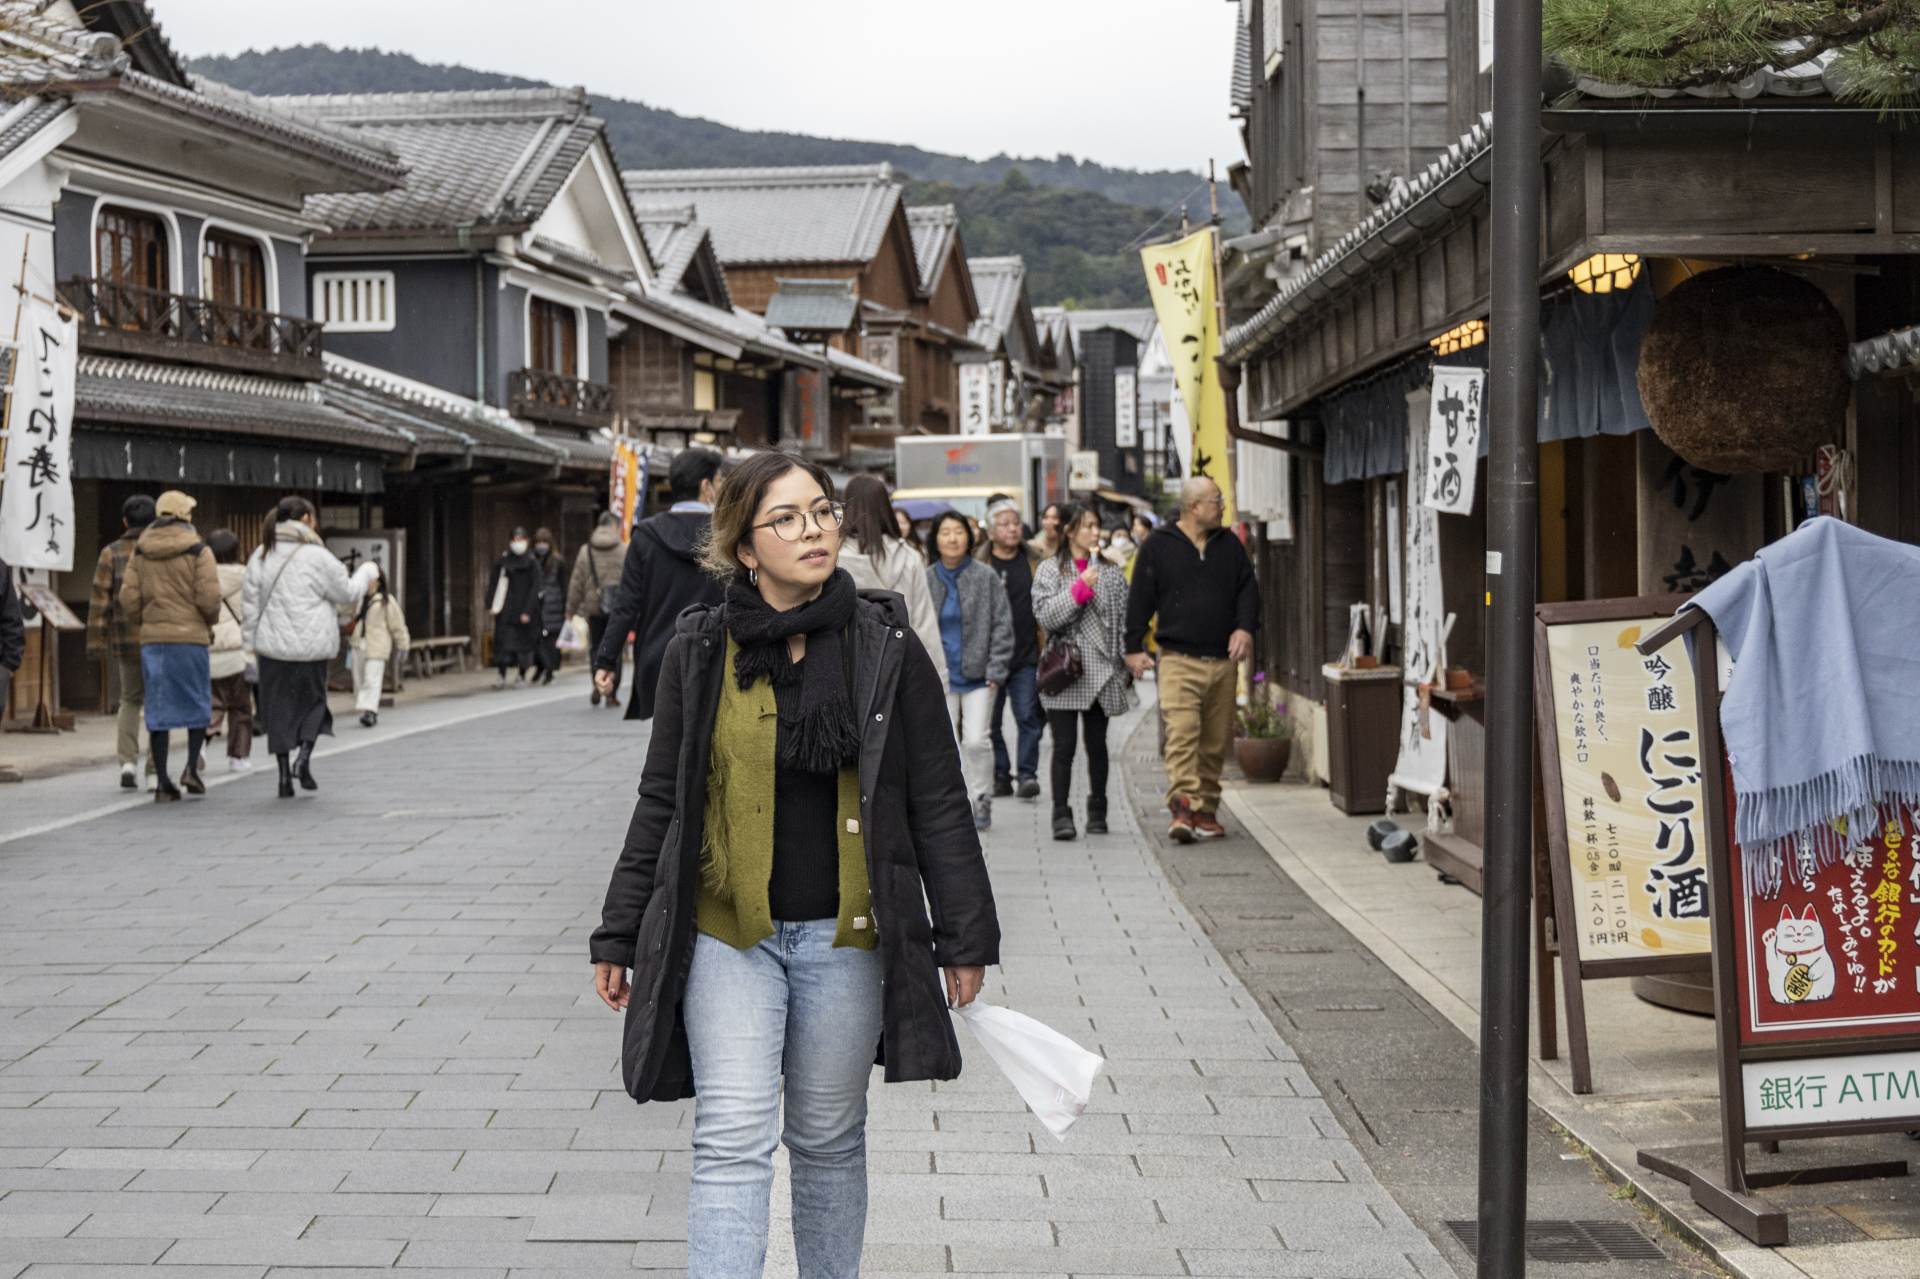 Wandering around the merchant streets outside of the shrine: the area is lively with visitors, though it must have been just as thriving back when it was a pilgrimage point for people in the Edo-period.